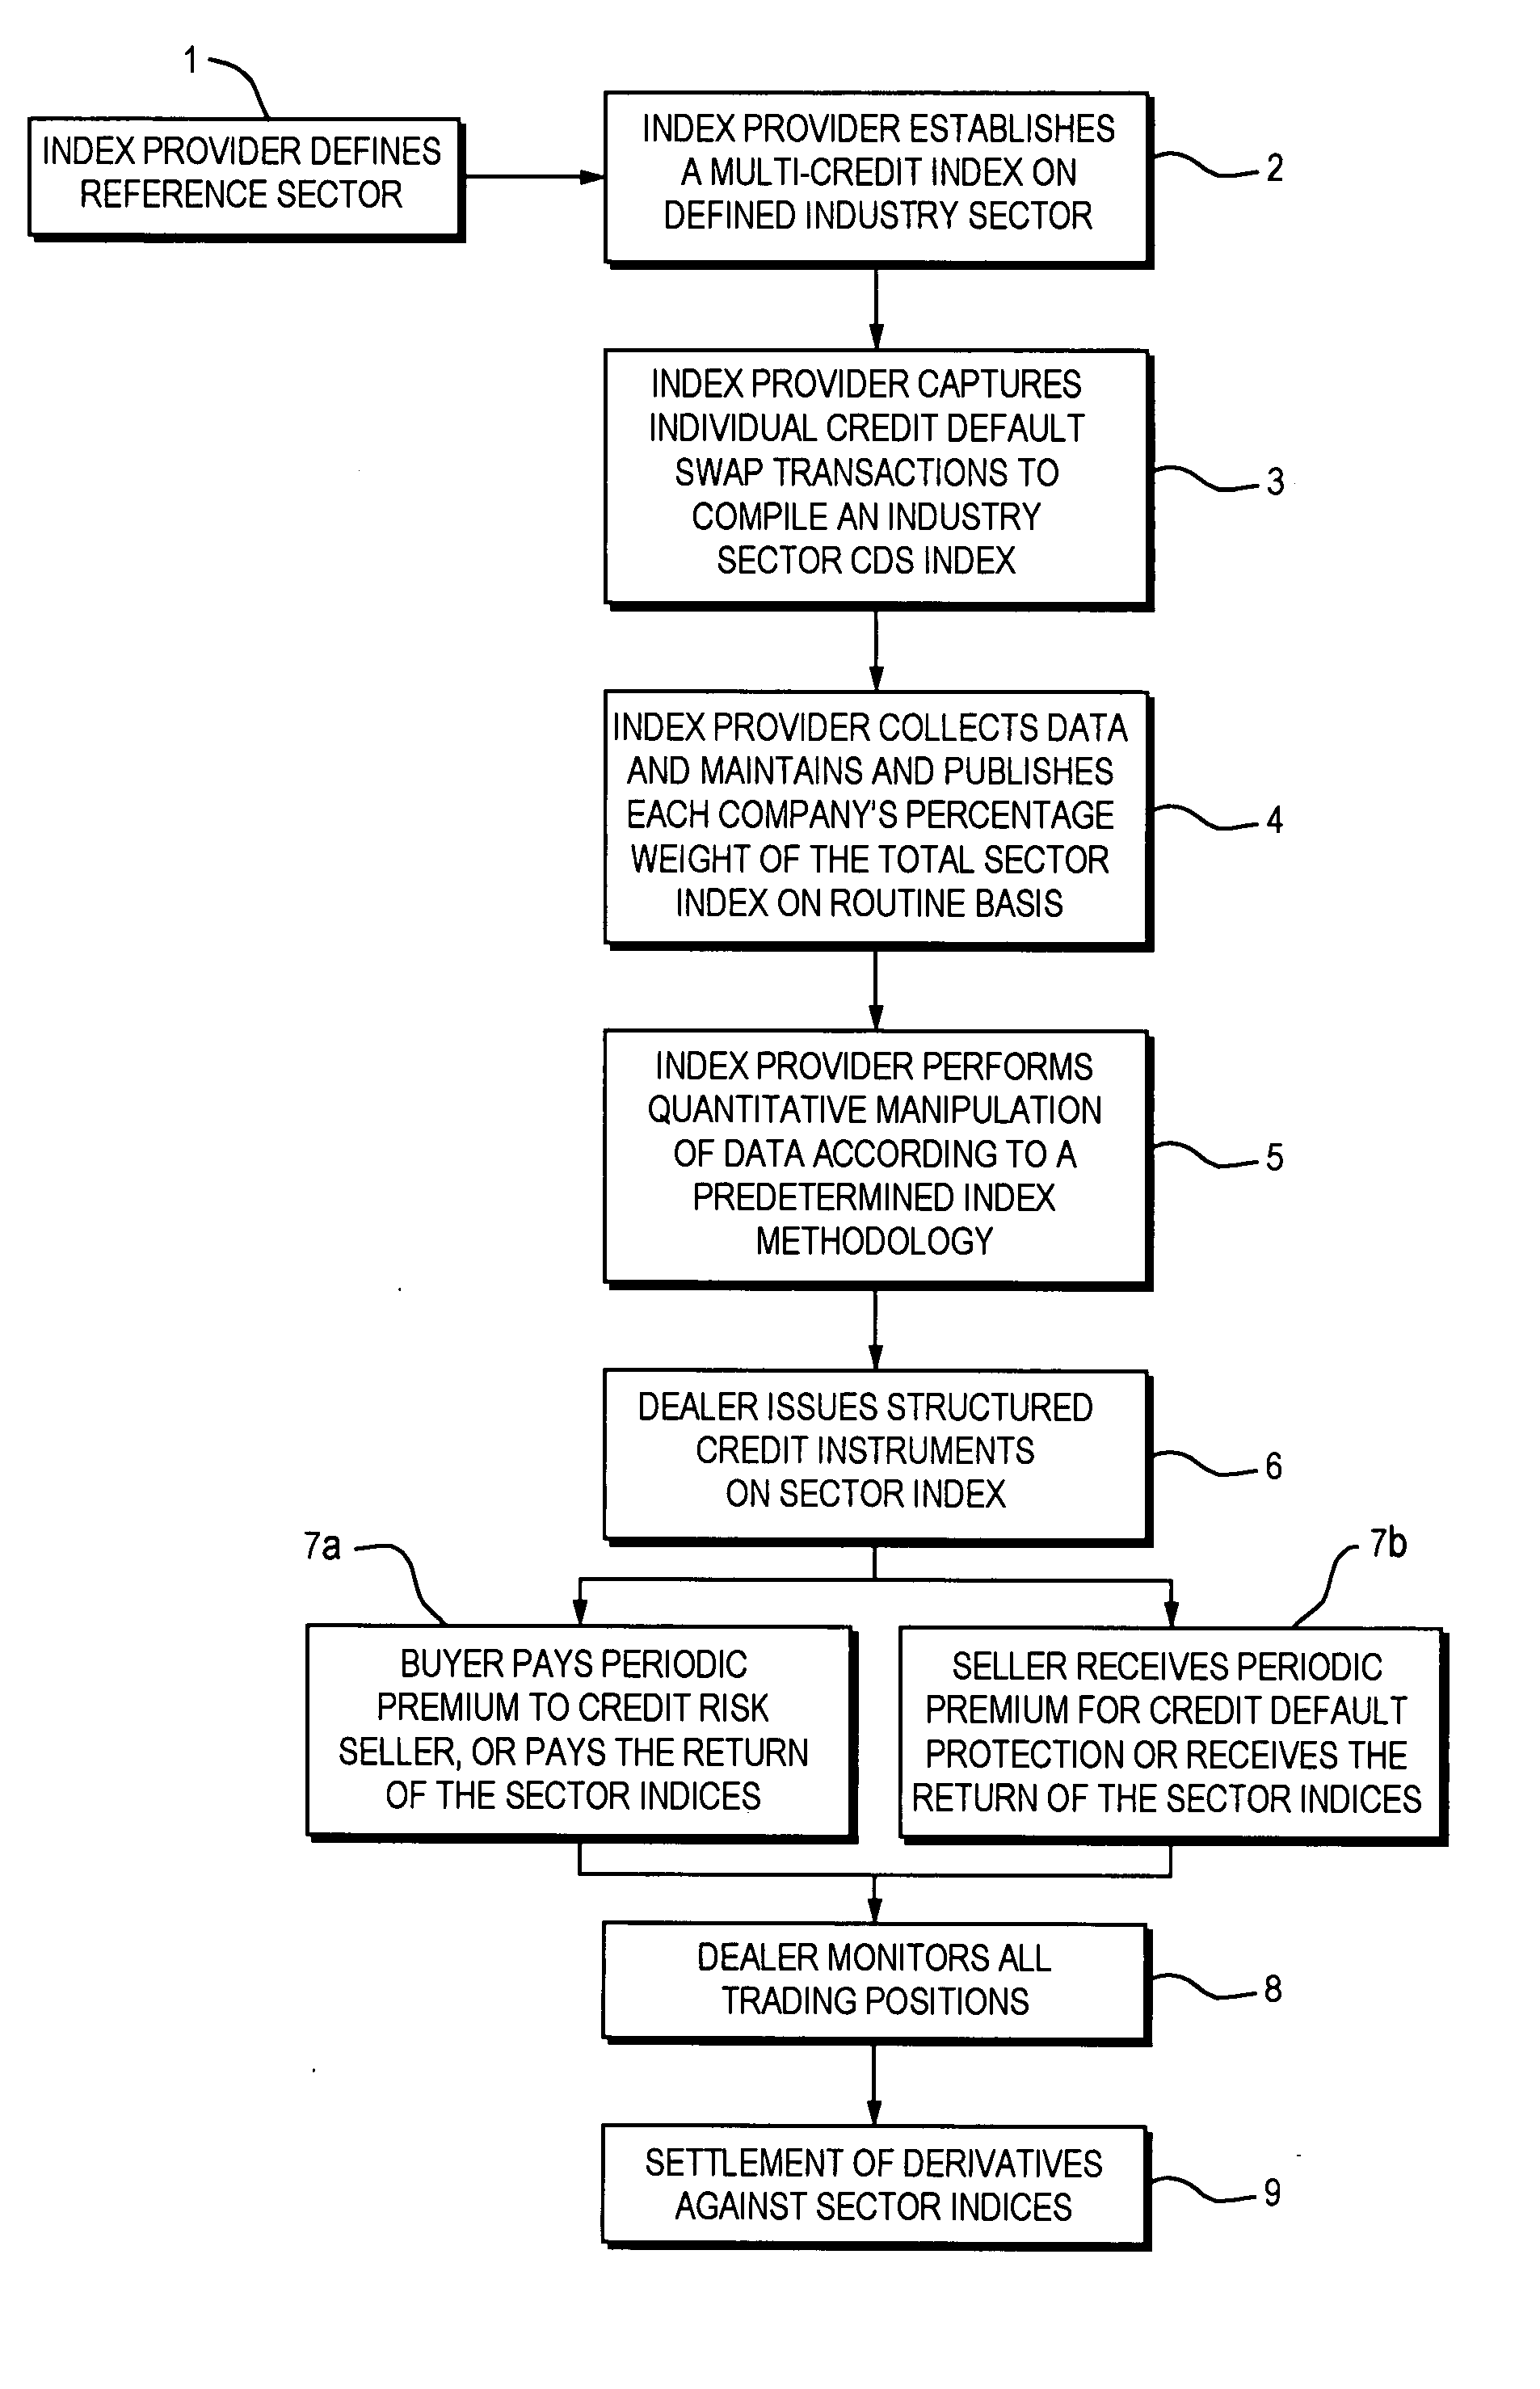 Process and method for establishing credit default swap indices on defined economic sectors to support the creation, trading and clearing of credit derivative instruments